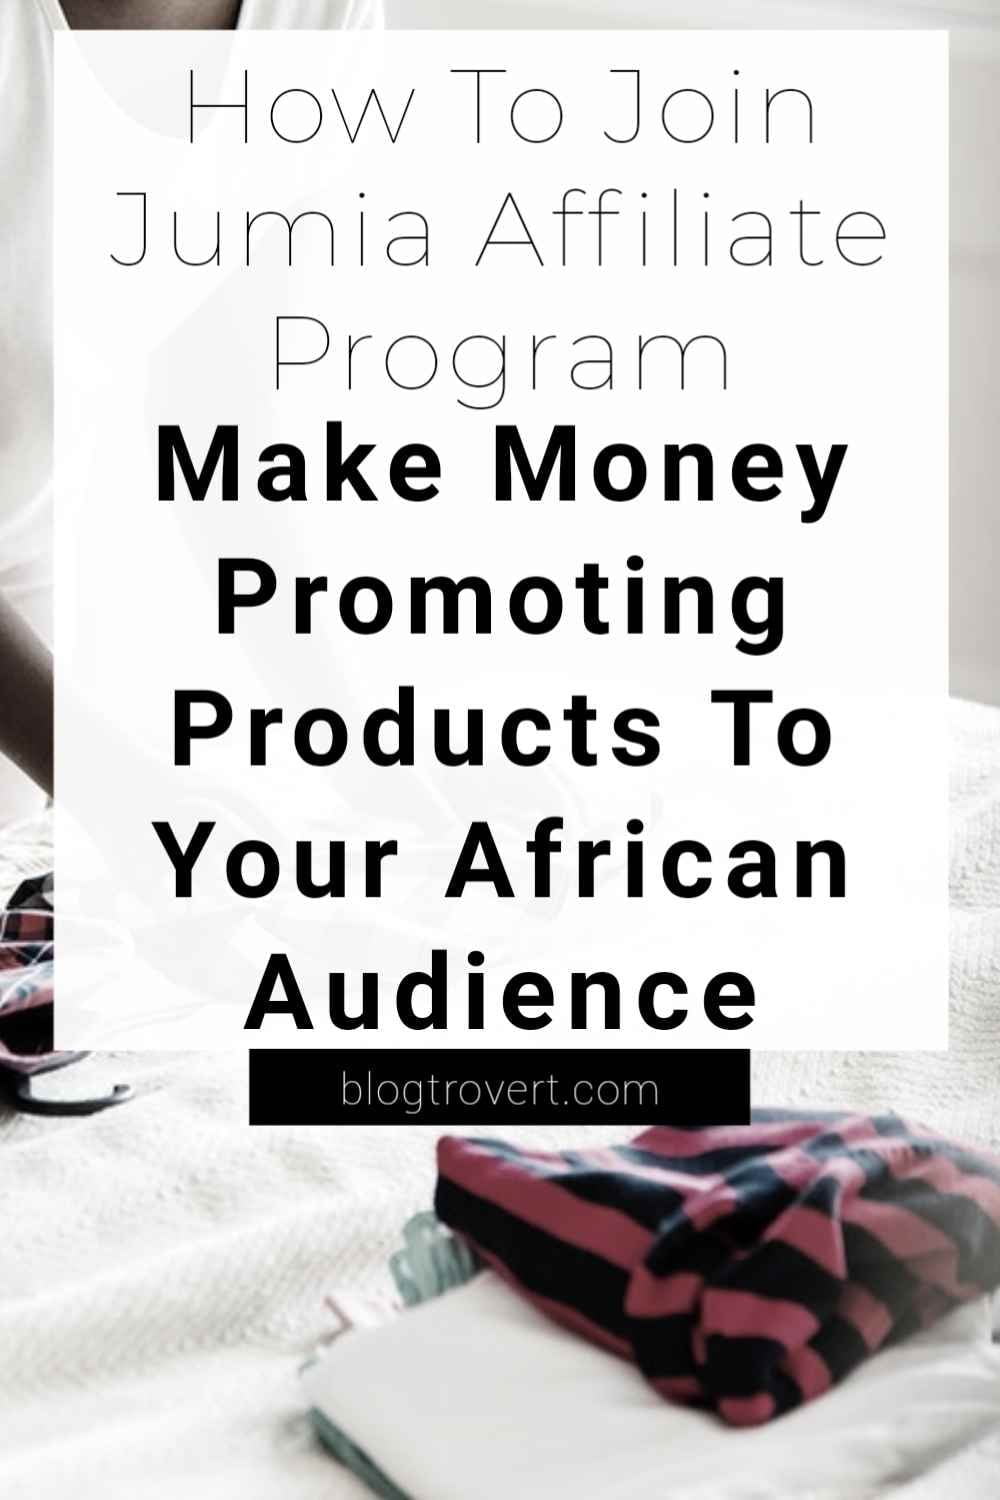 How to Join Jumia Affiliate Program - The ultimate guide 1